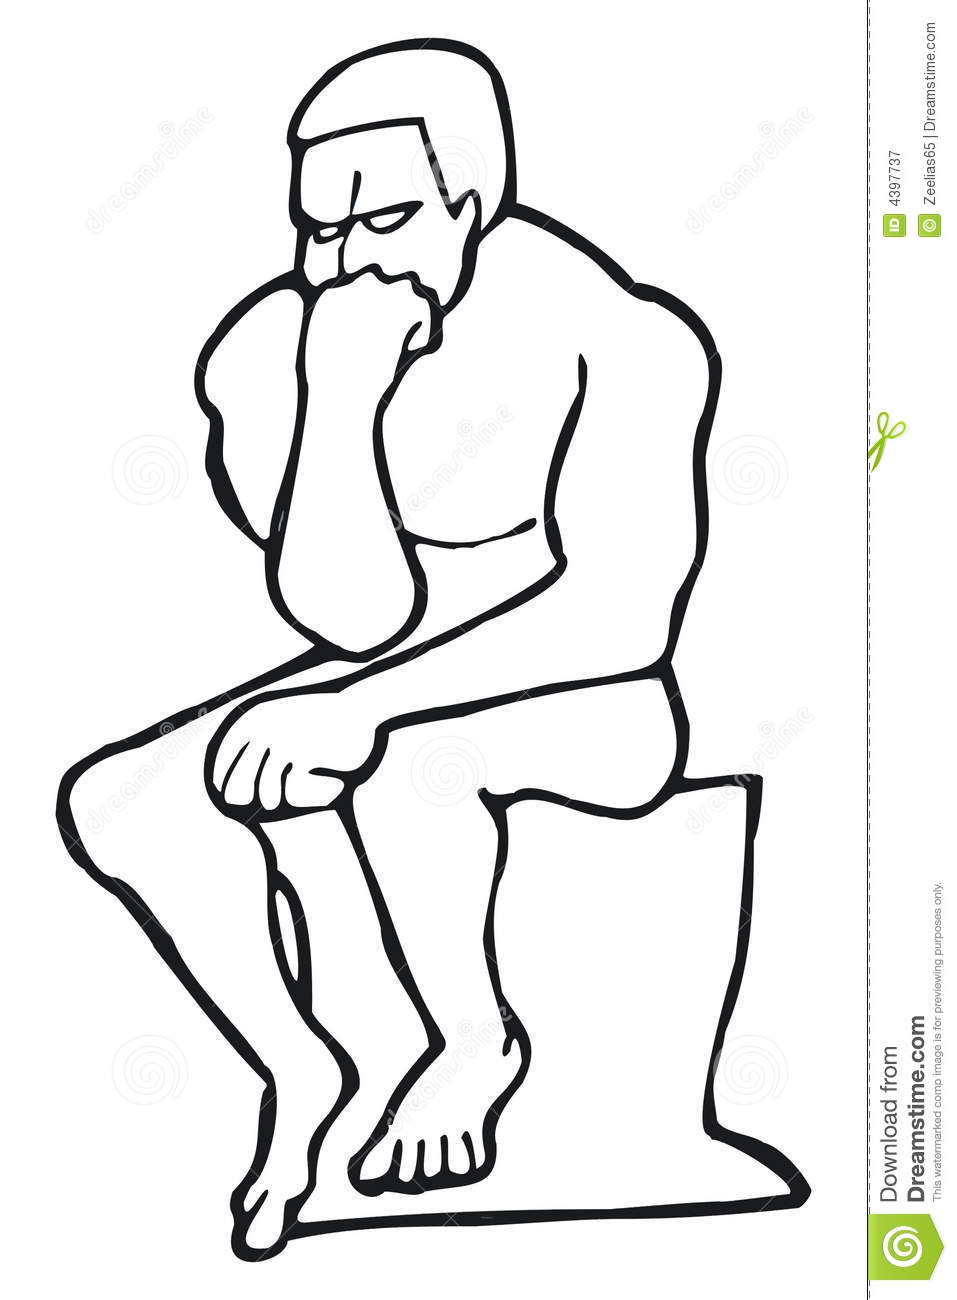 Art Illustration Of The Statue The Thinker